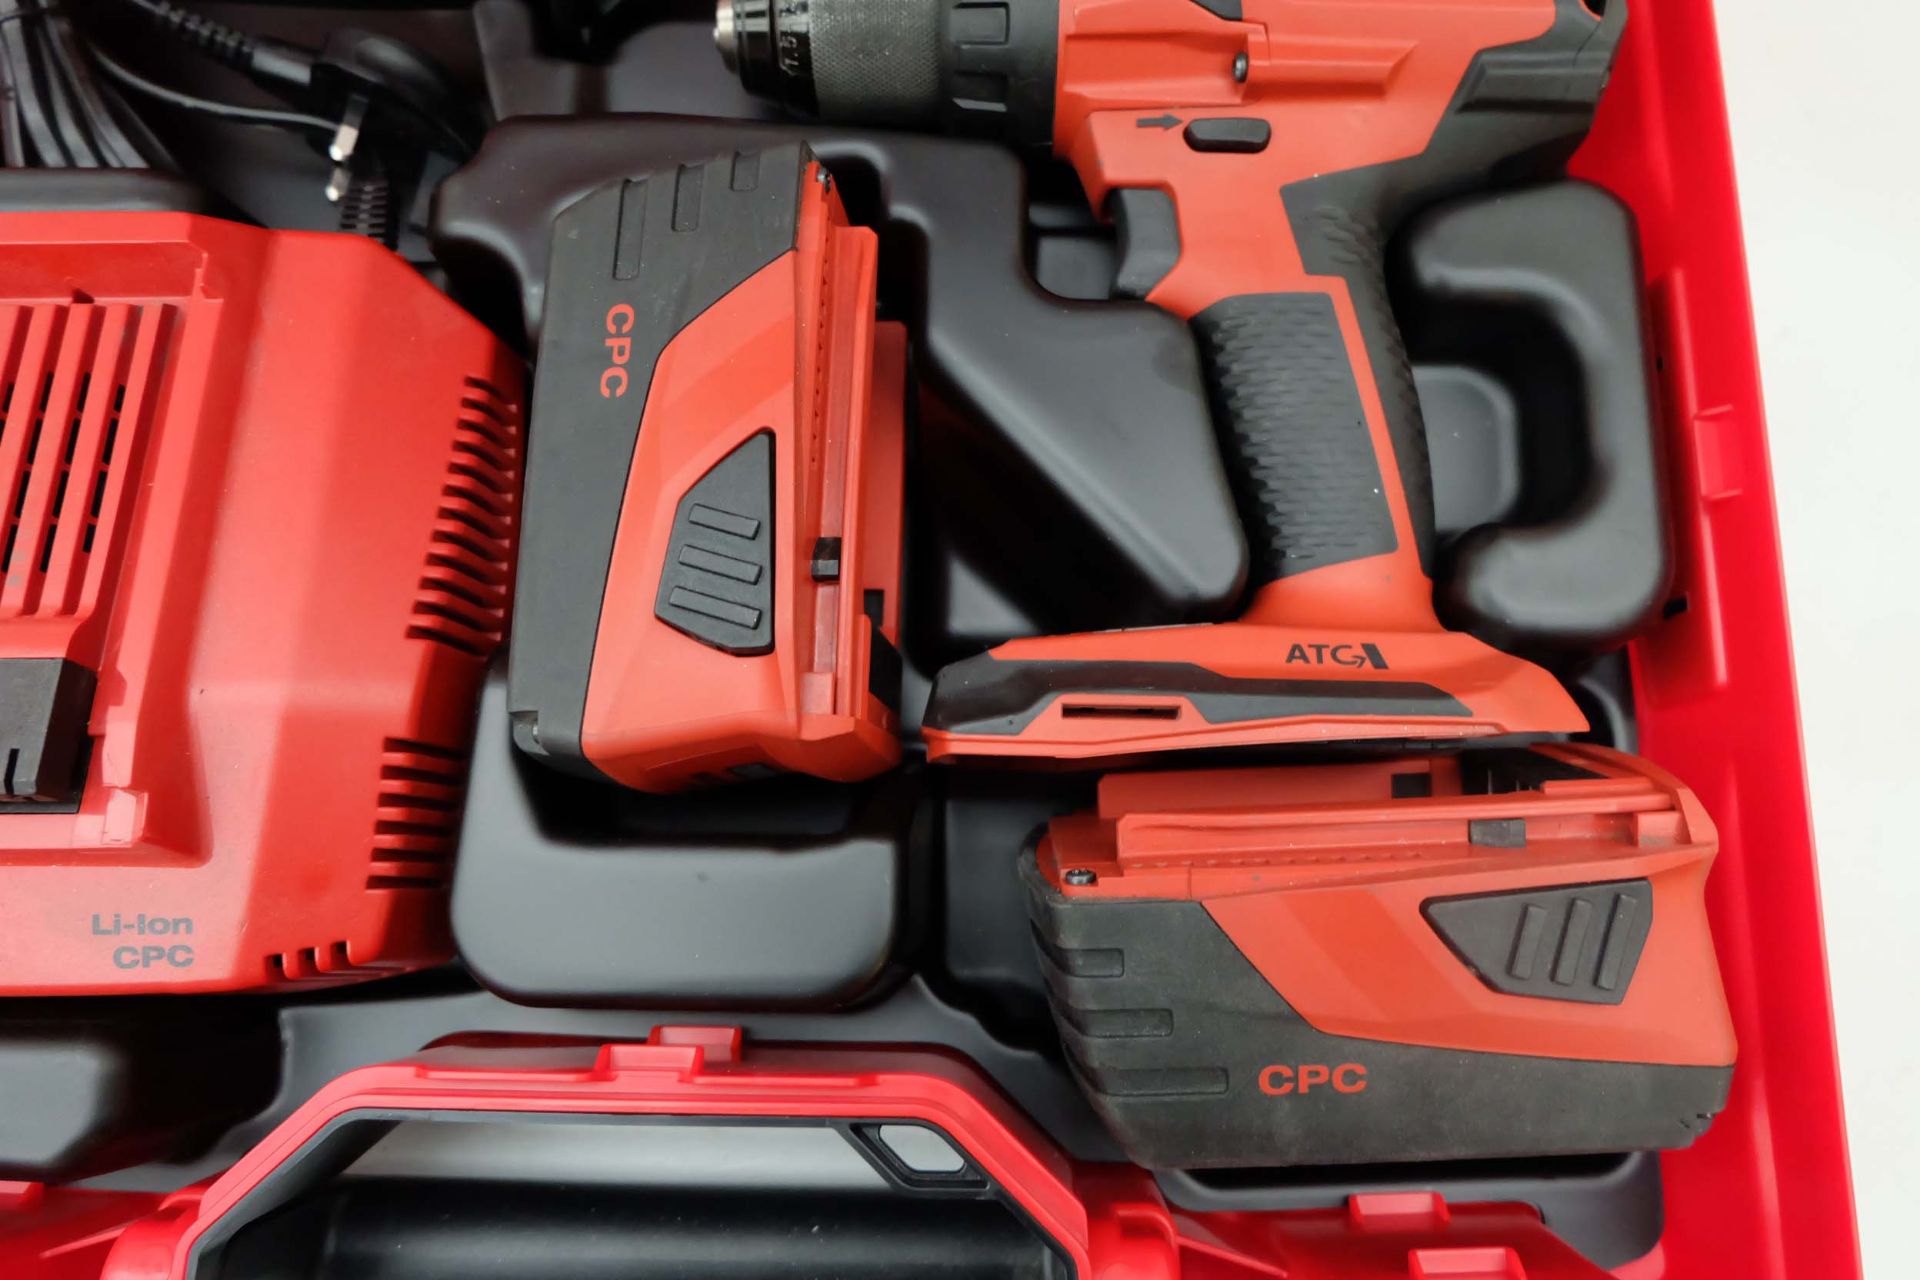 Hilti Model SF 6-A22 Cordless Power Drill. 2 x 22V 5.2Ah Batteries. 240V Charger. - Image 3 of 8